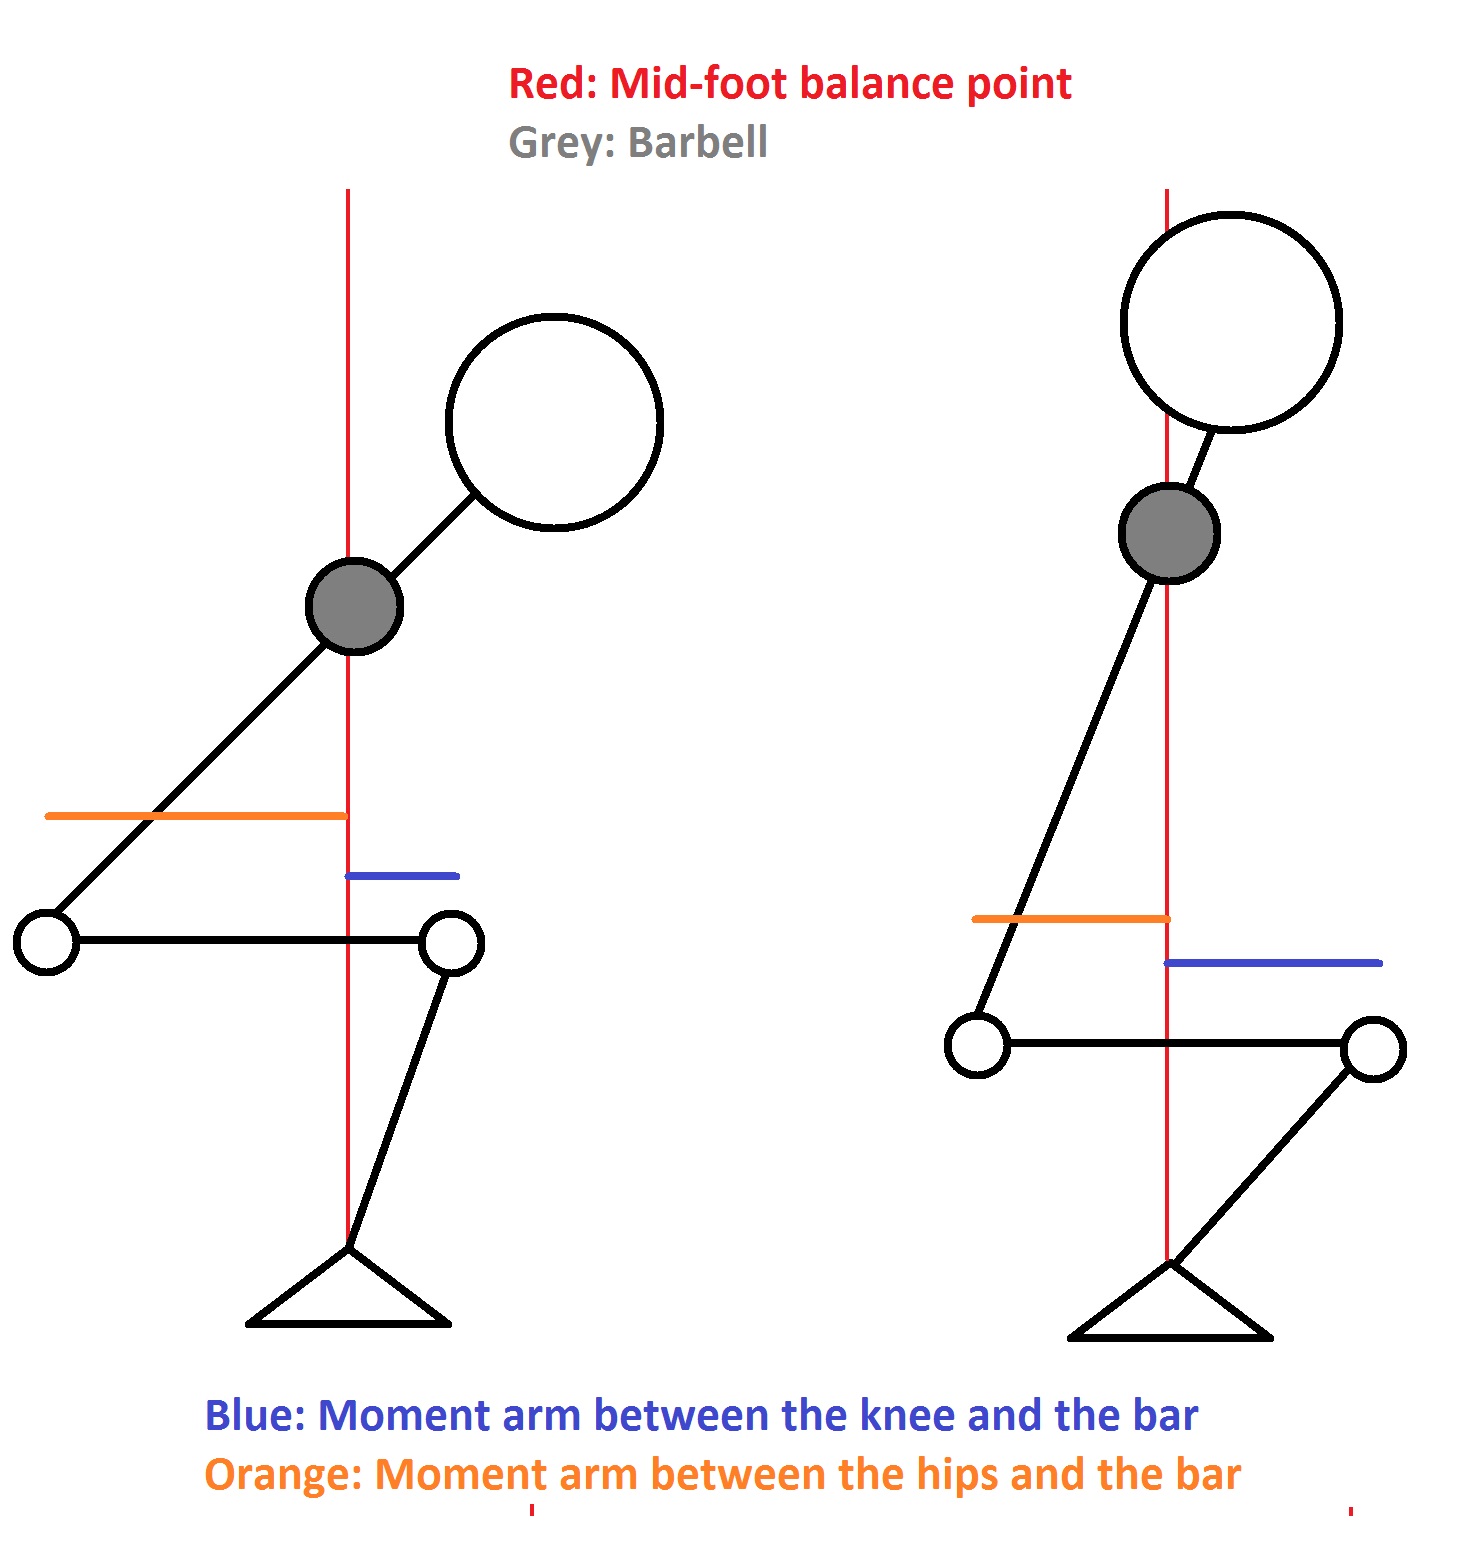 Notice that the low bar squat trades a shorter lever arm at the knee for a longer one at the hips